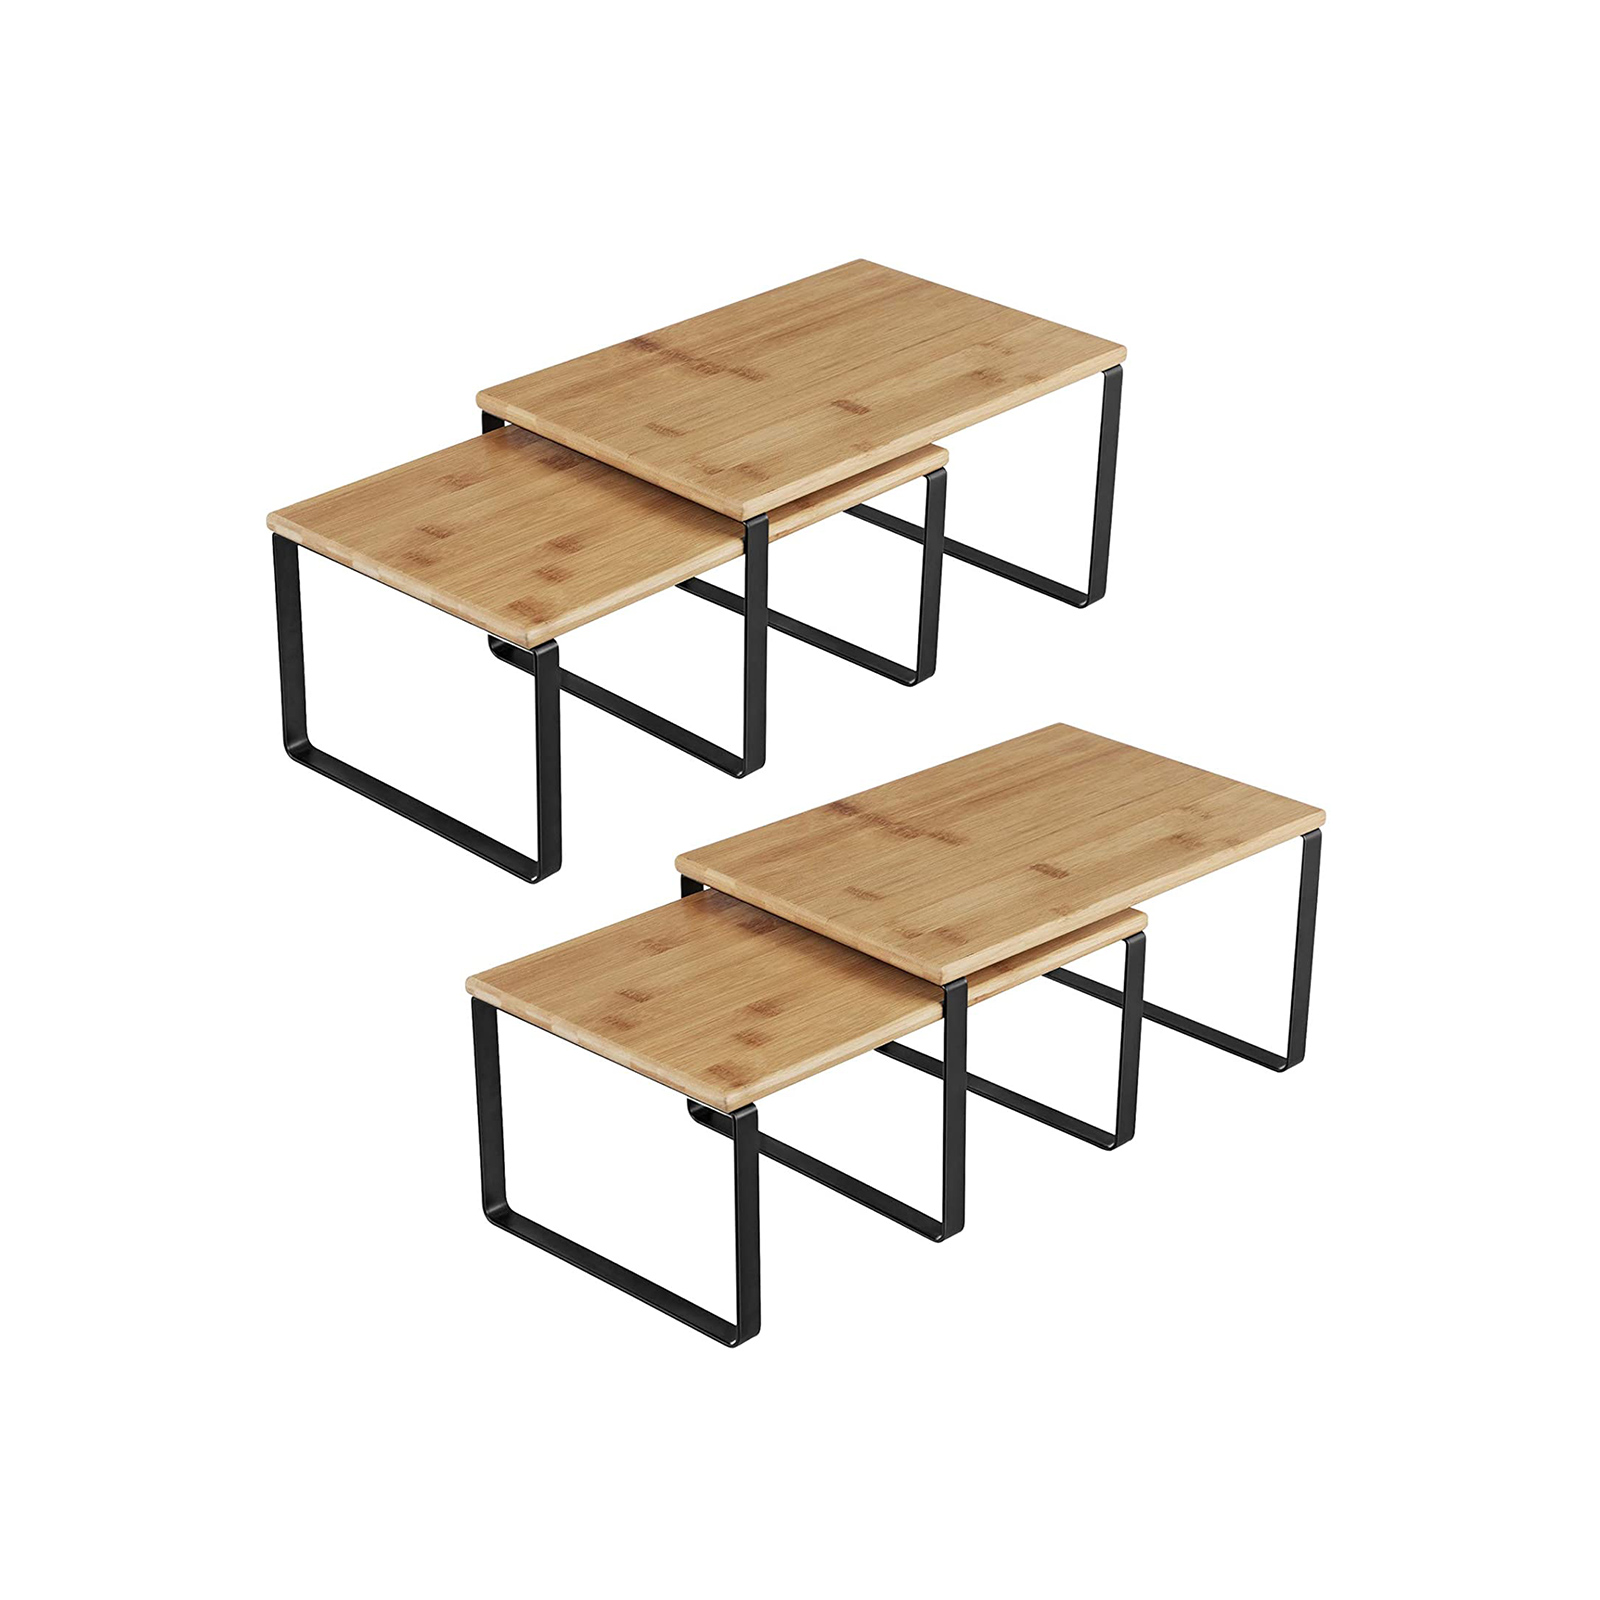 Stackable Set of 4 Kitchen Counter Shelves Expandable SONGMICS Cabinet Shelf Organizer Black and Natural UKCS10NB Metal and Bamboo 